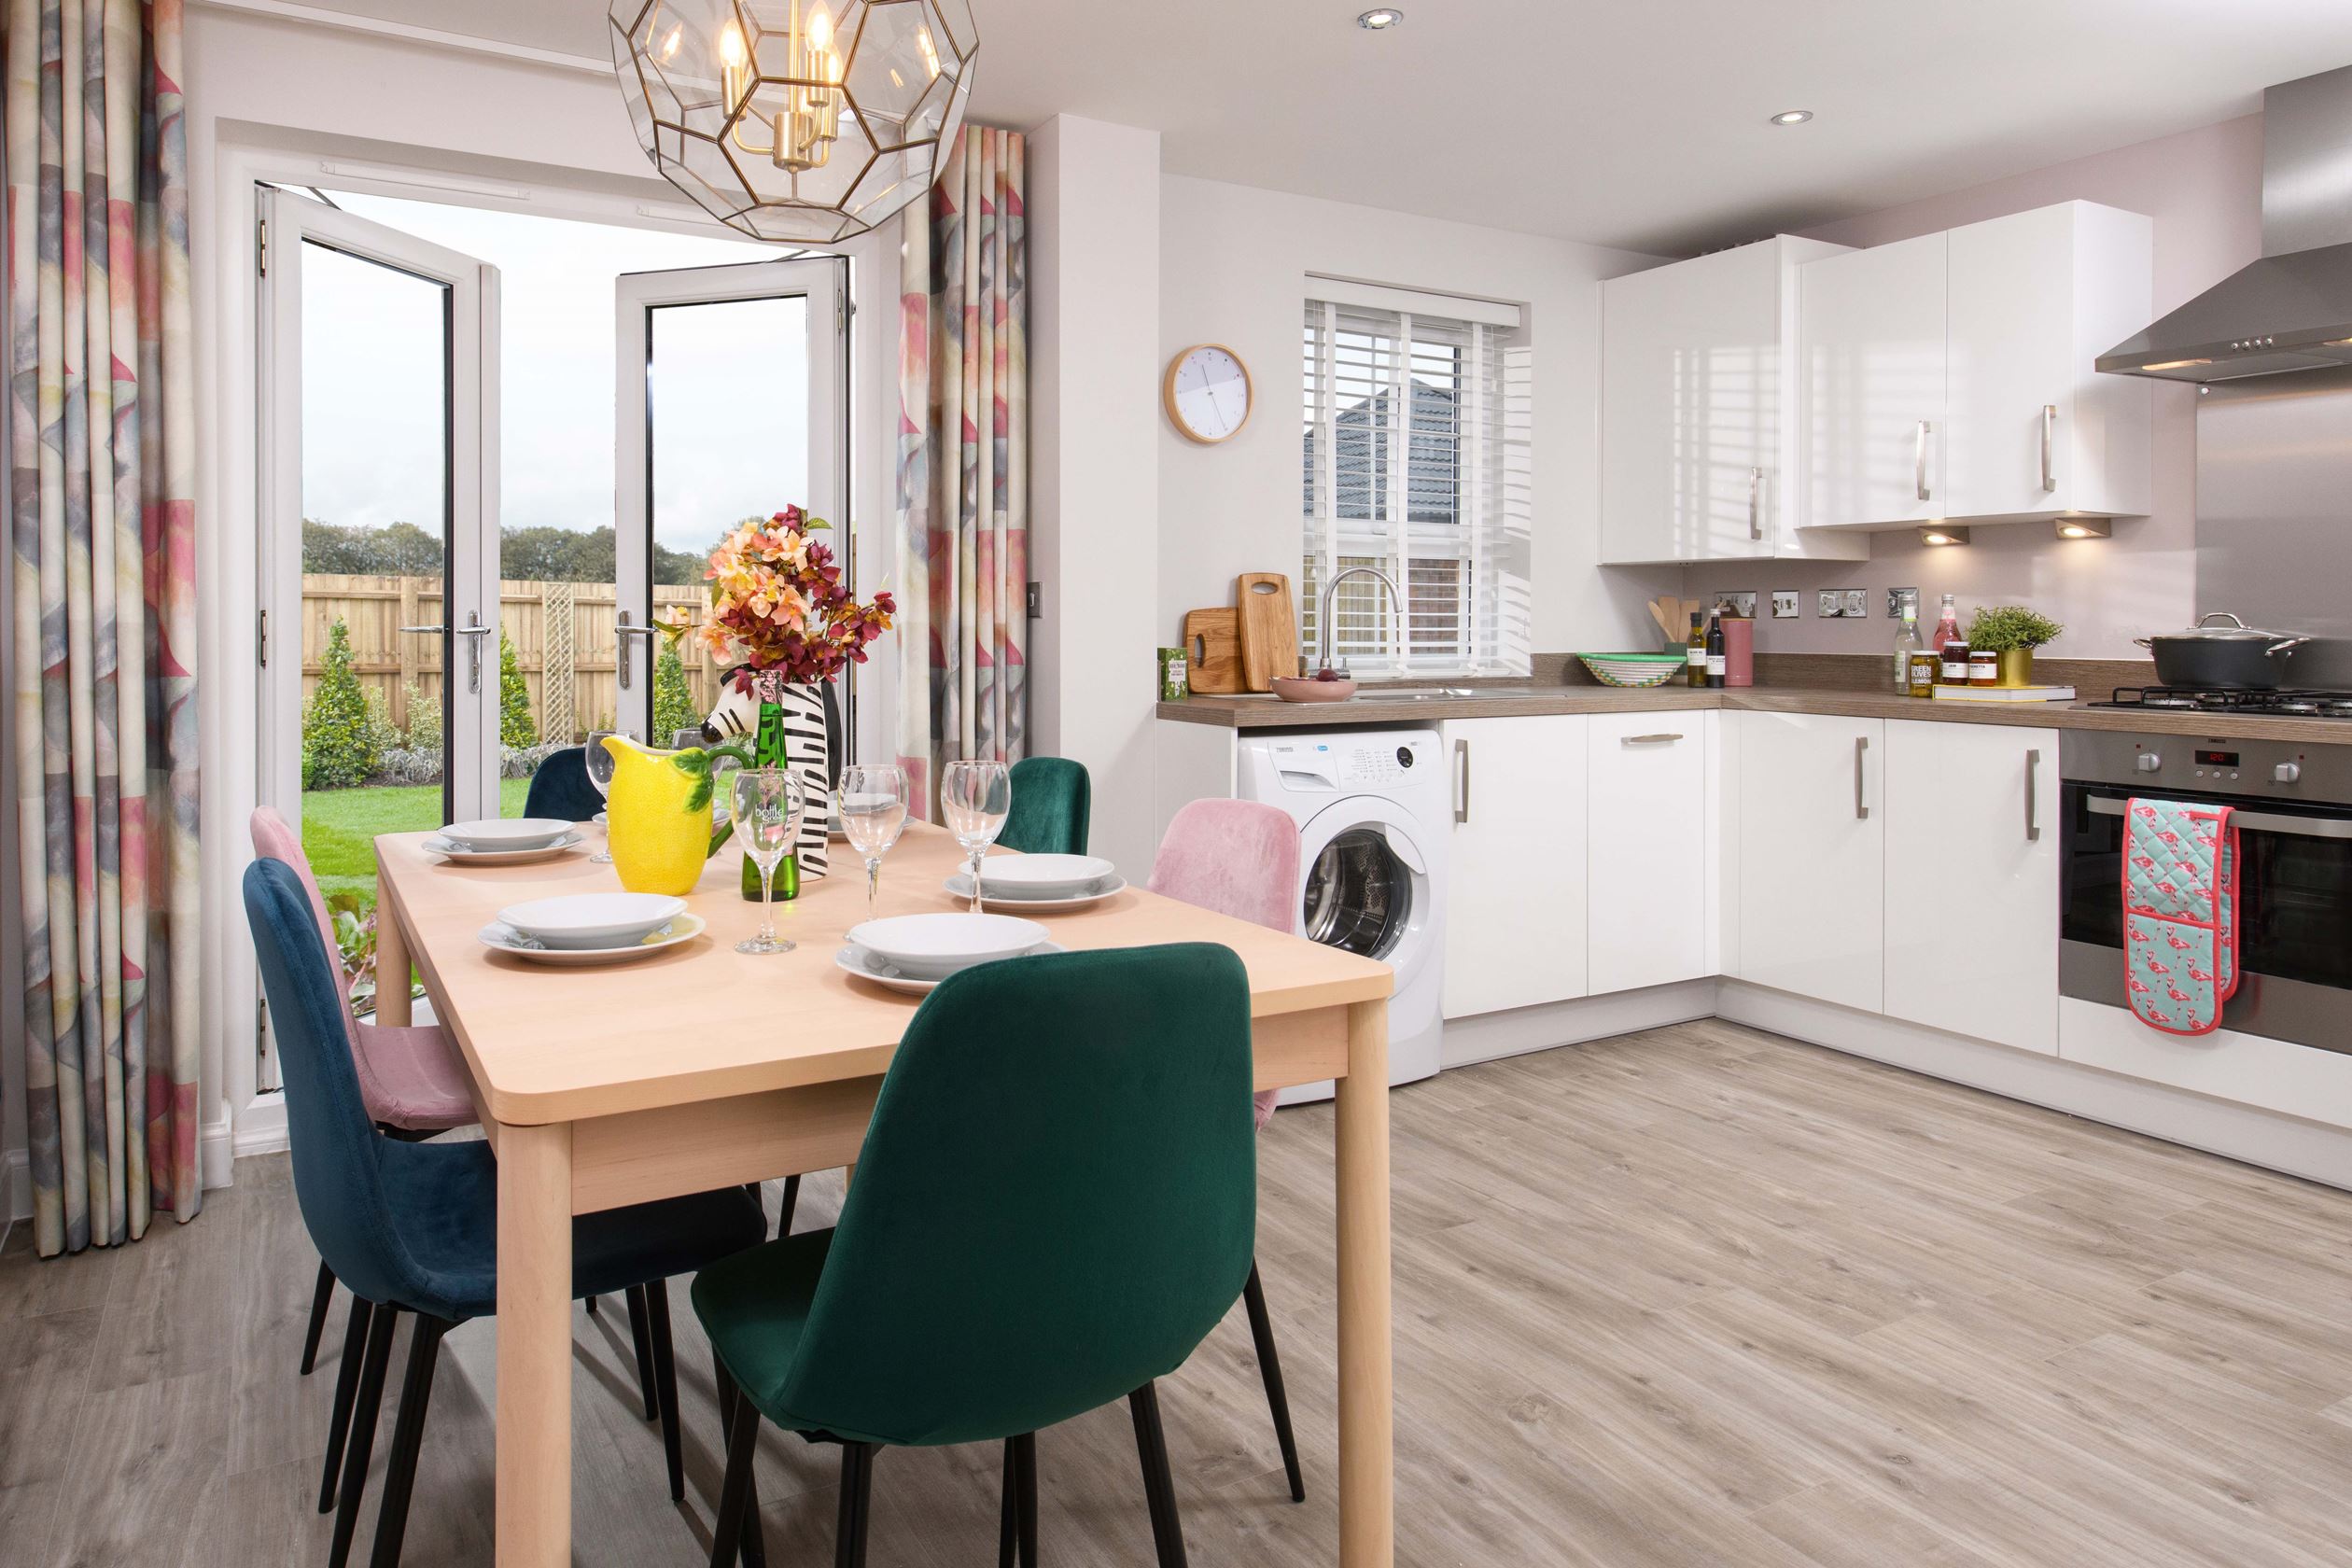 Property 1 of 7. Kitchen Diner In The Maidstone 3 Bedroom Show Home